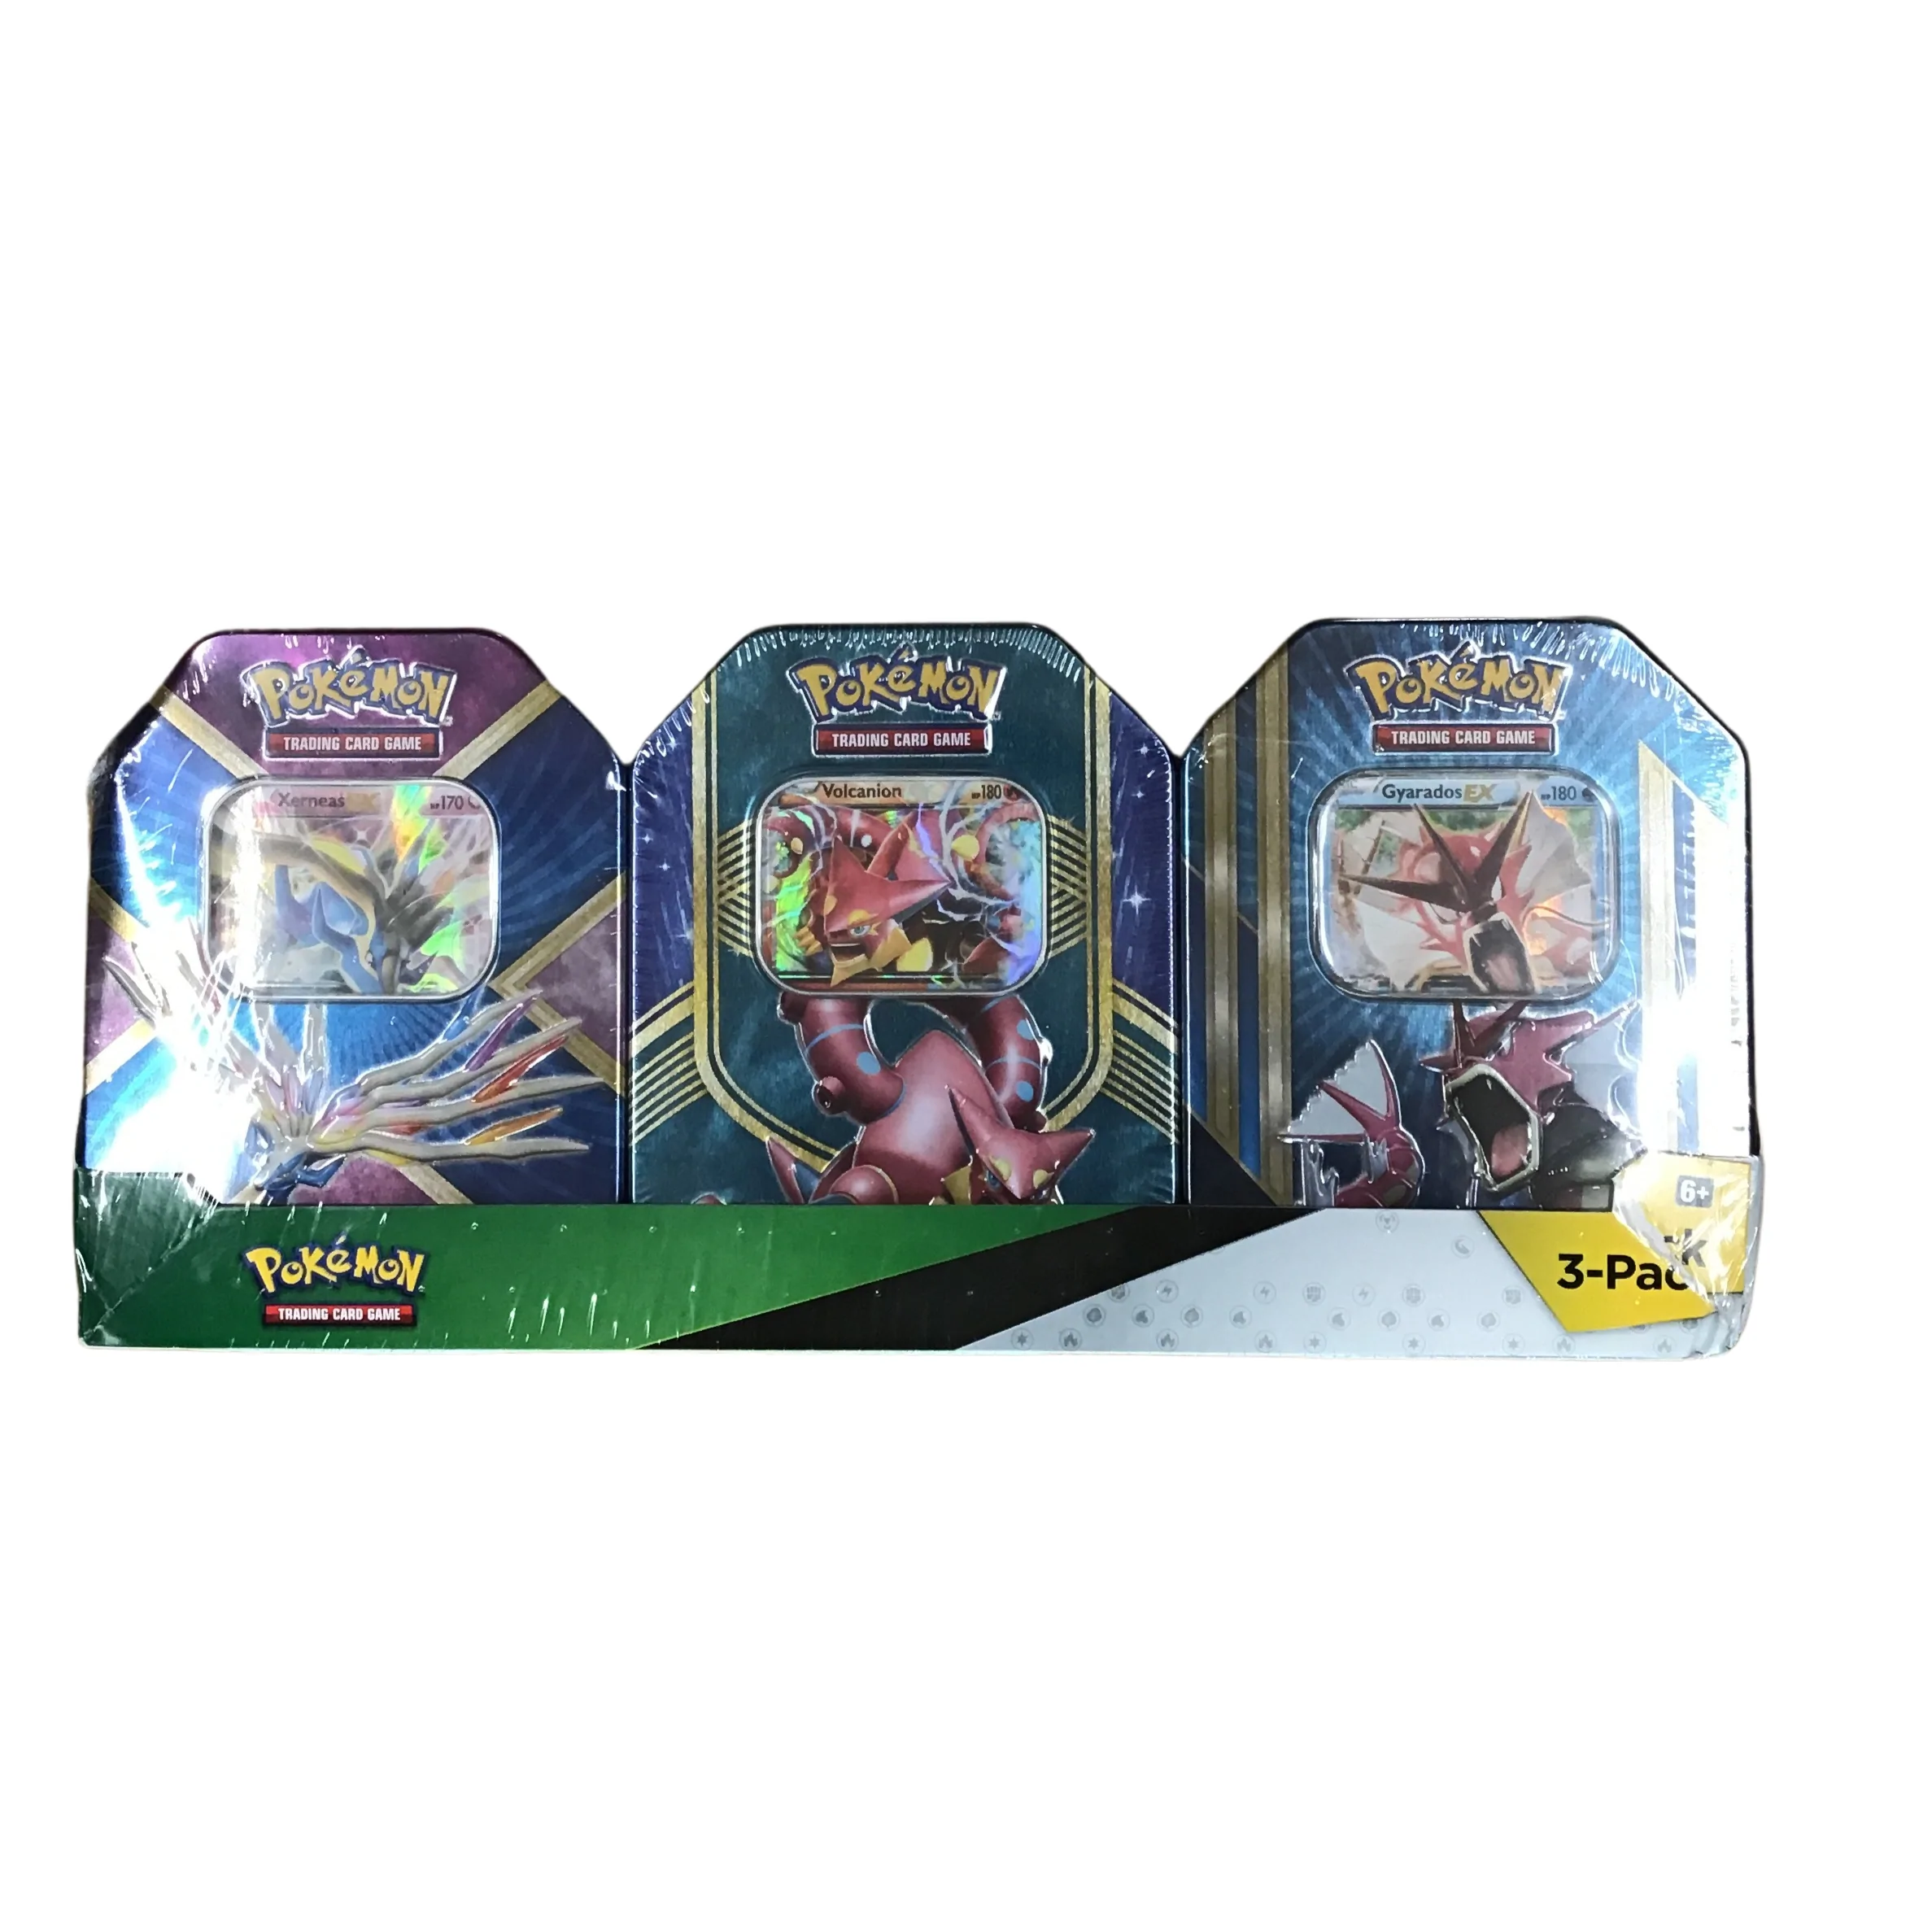 Pokémon: Trading Card Game / 3 Pack **DEALS **